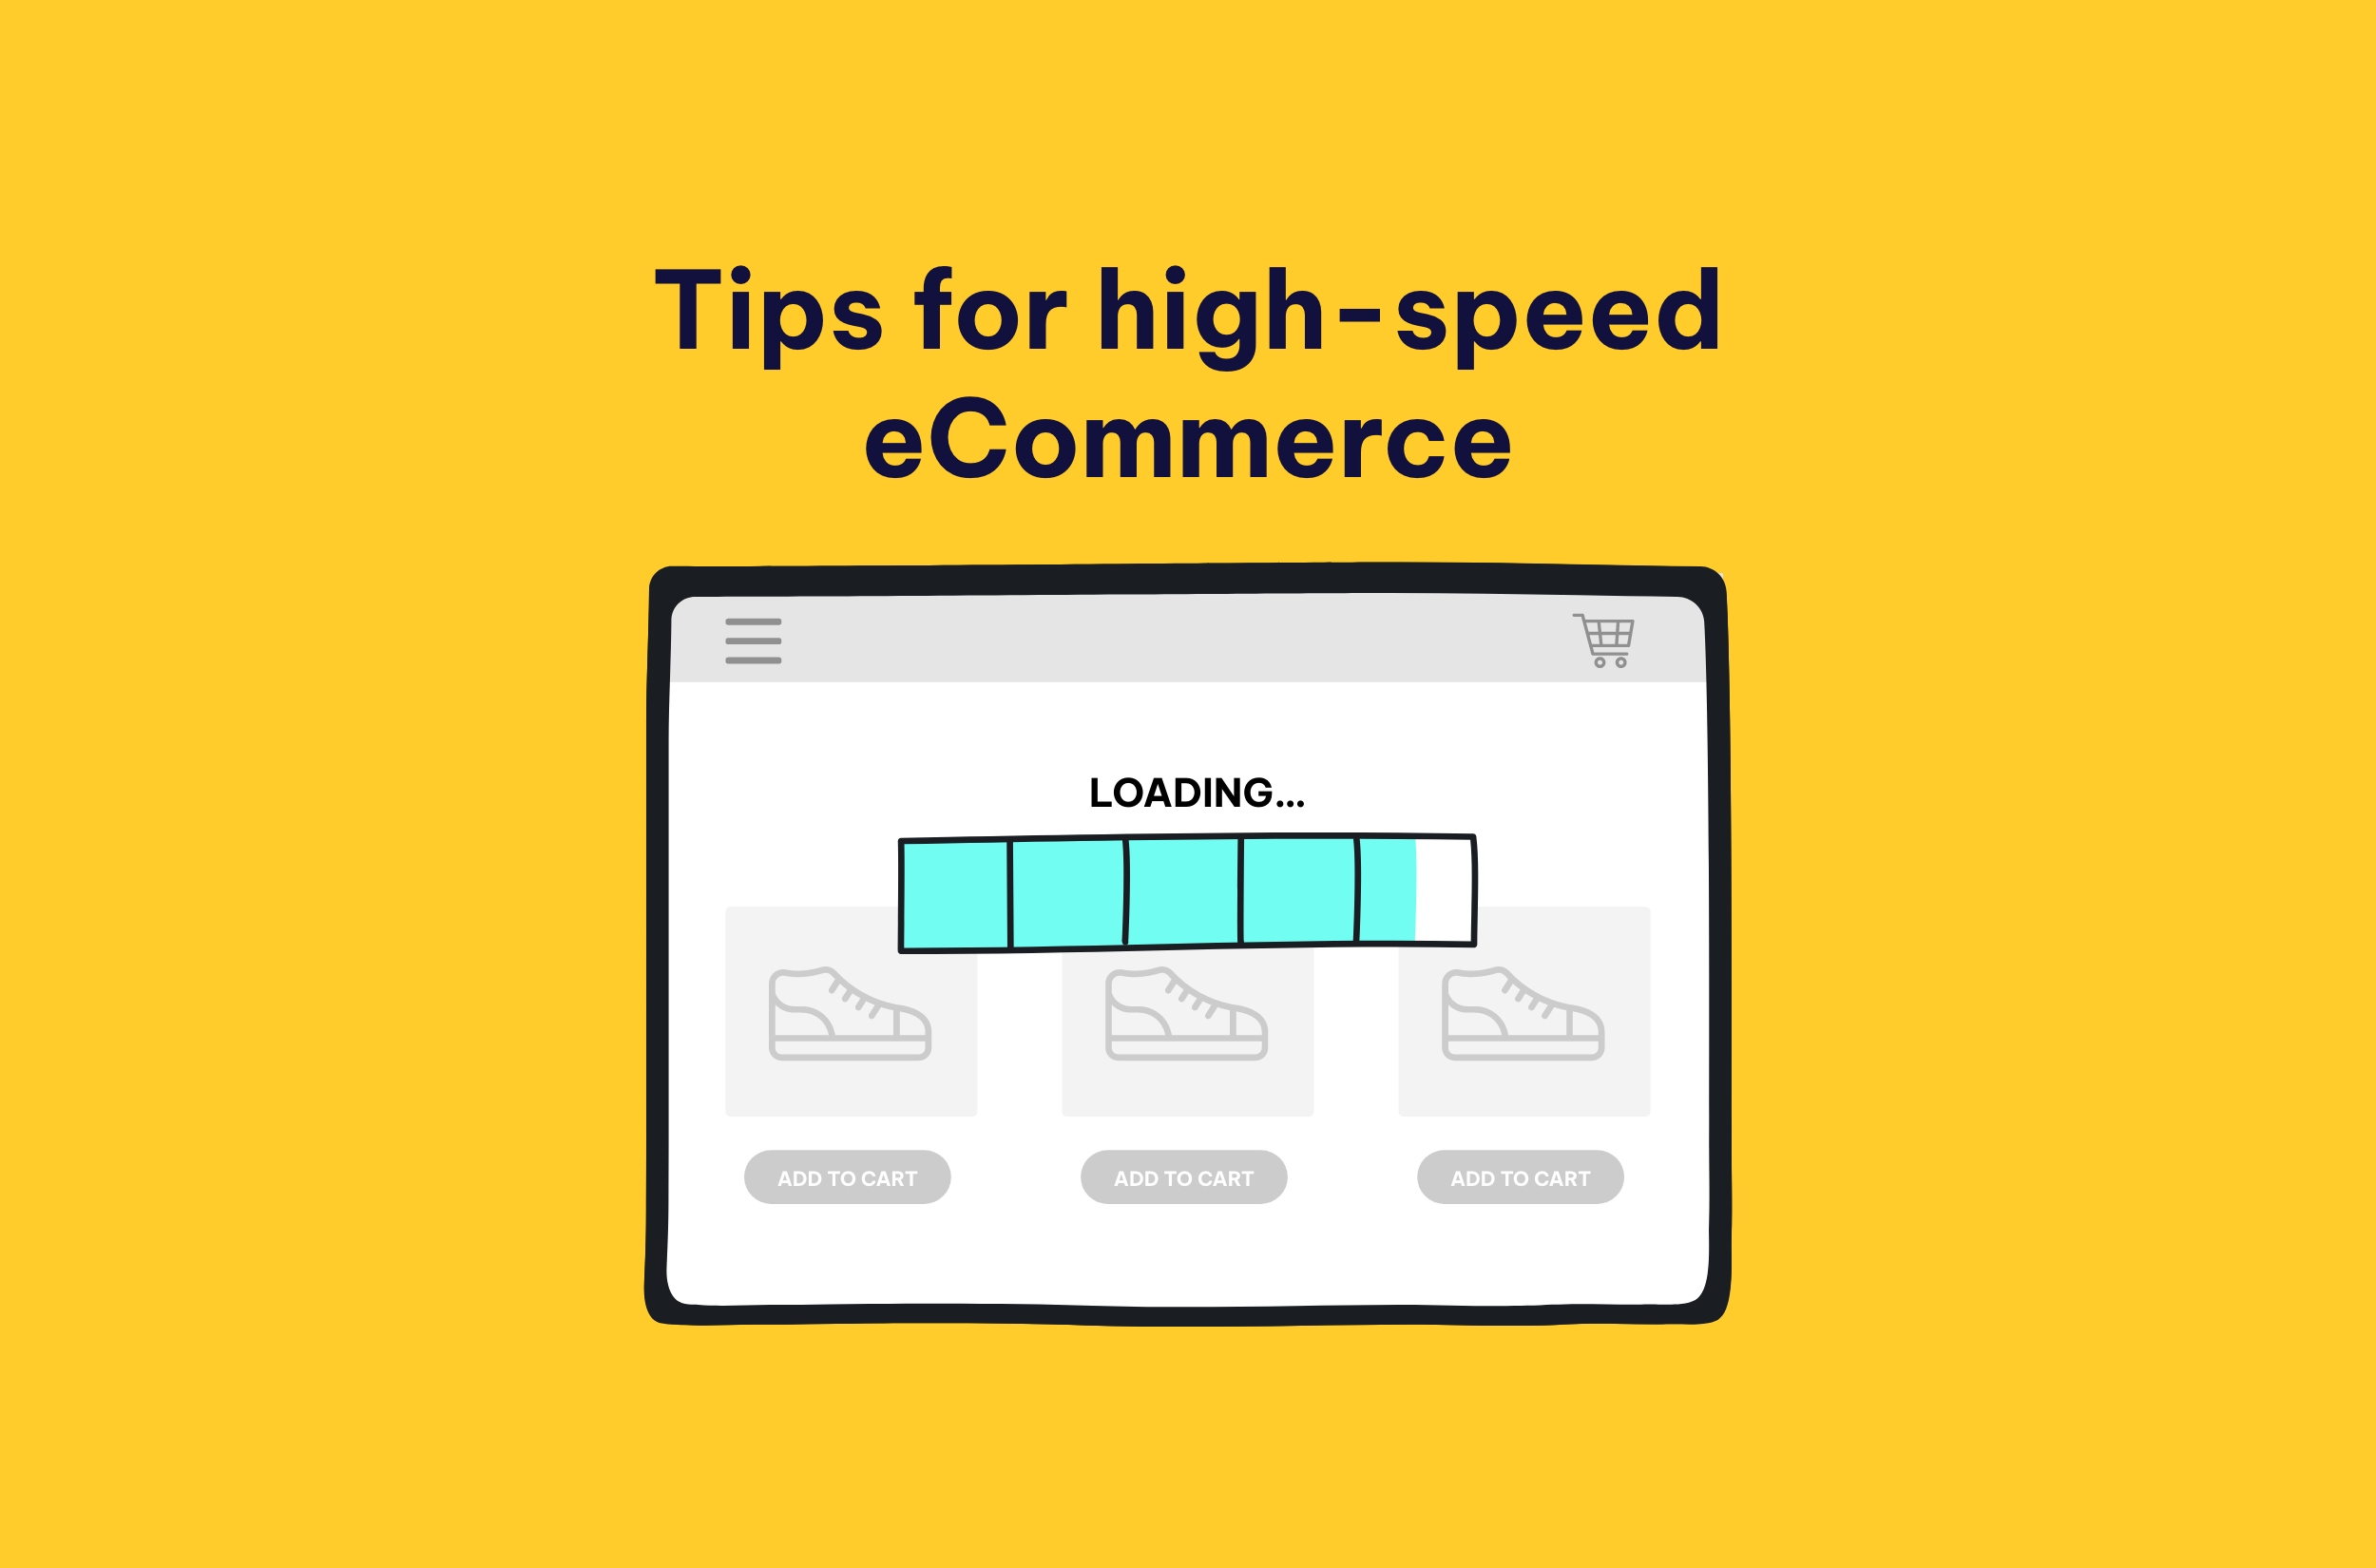 A WooCommerce store must be fast! Here’s how to get high-speed eCommerce